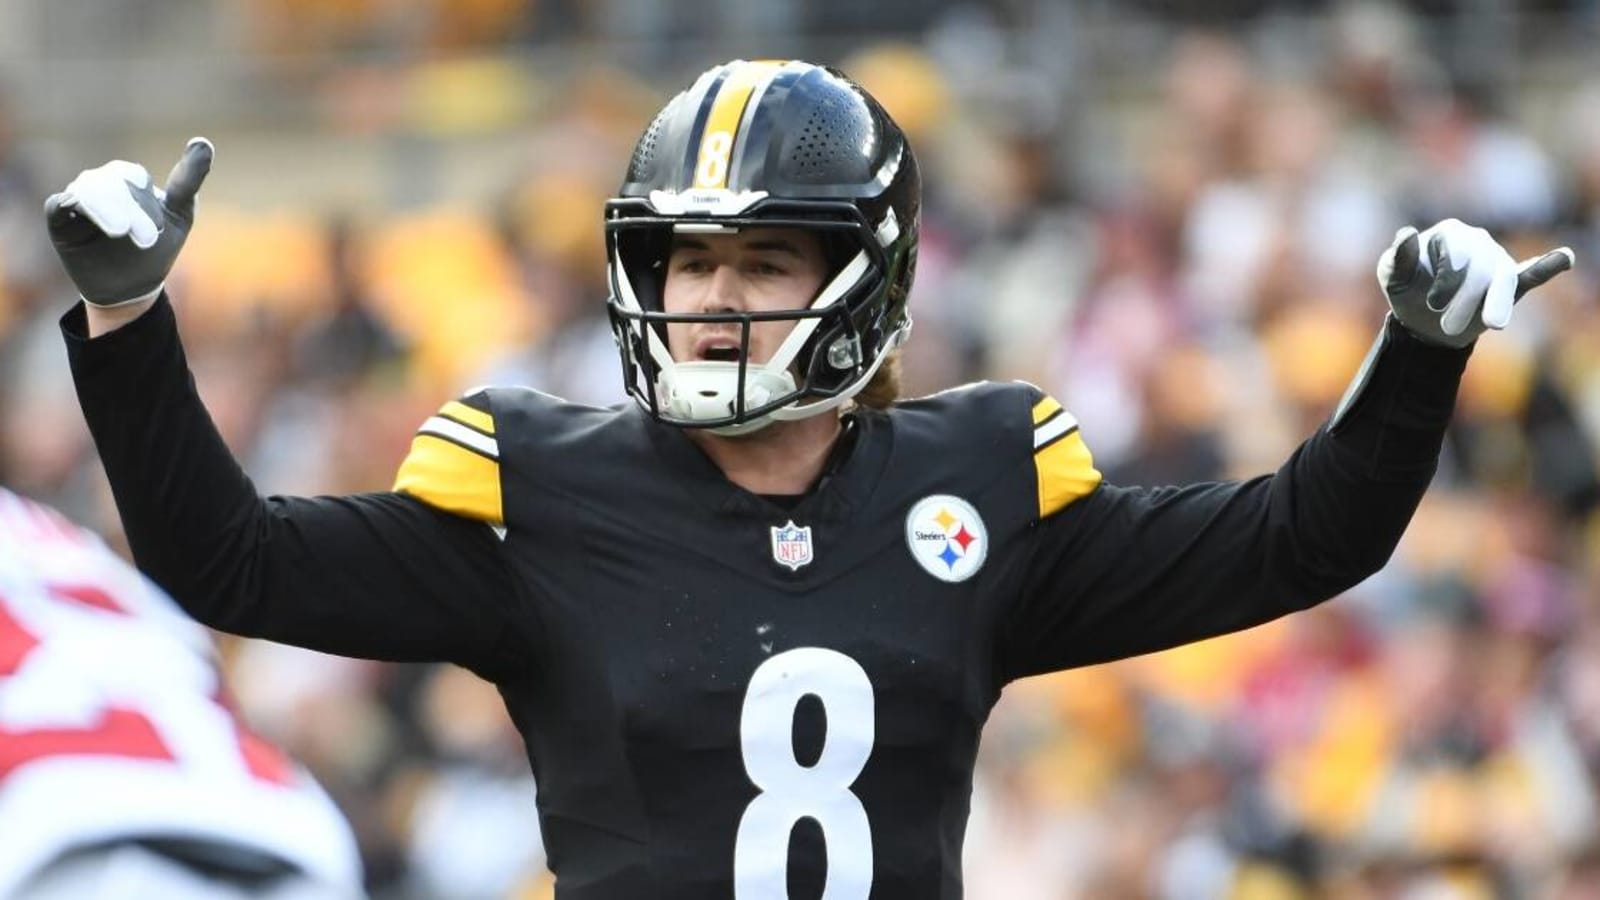 Terry Bradshaw weighs in on Steelers’ Kenny Pickett or trade for Justin Fields debate